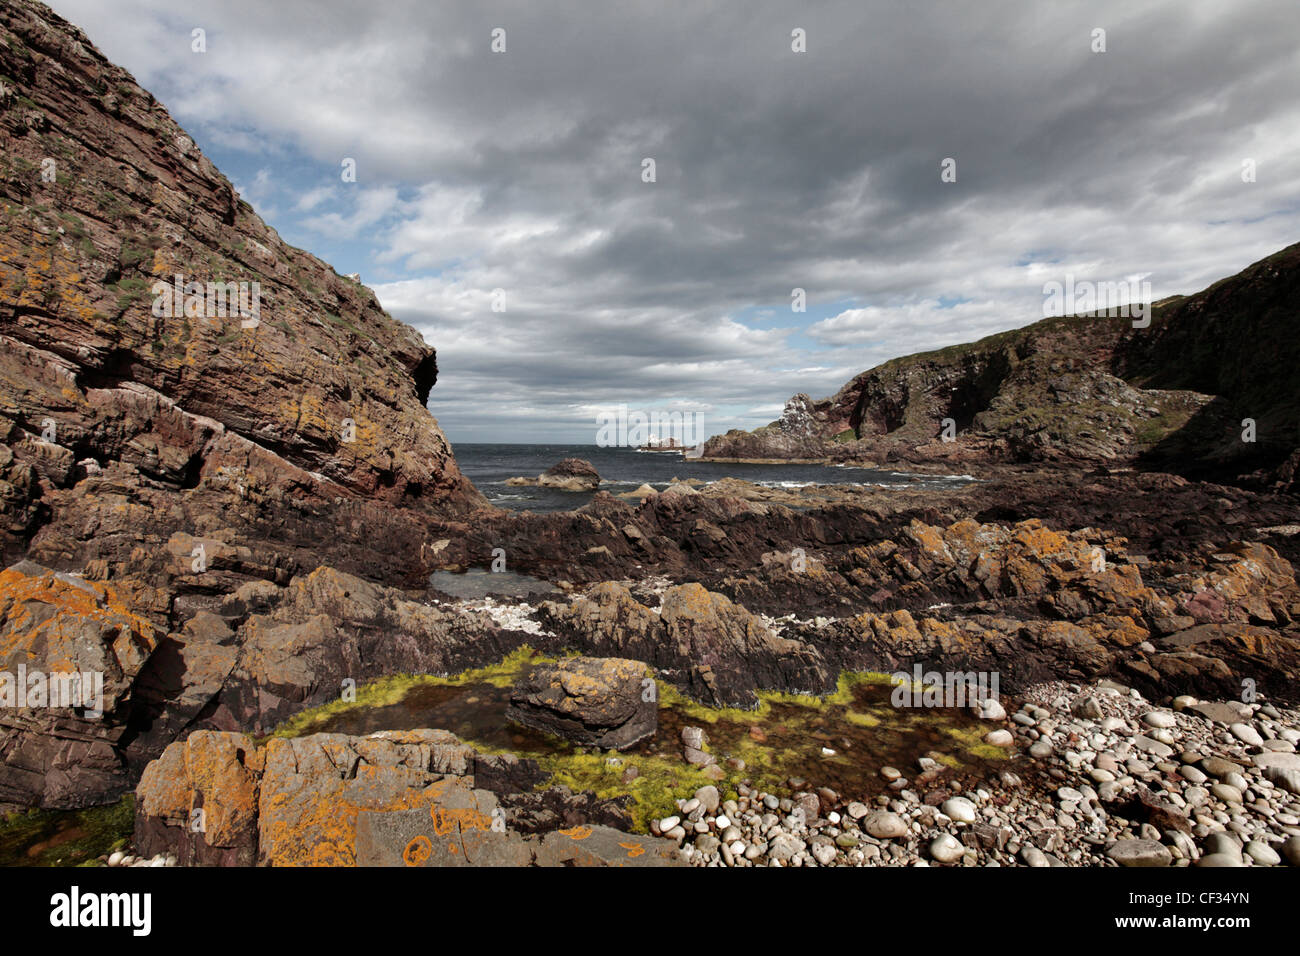 Rugged coastline at Findochty on the north east coast of Scotland. Stock Photo